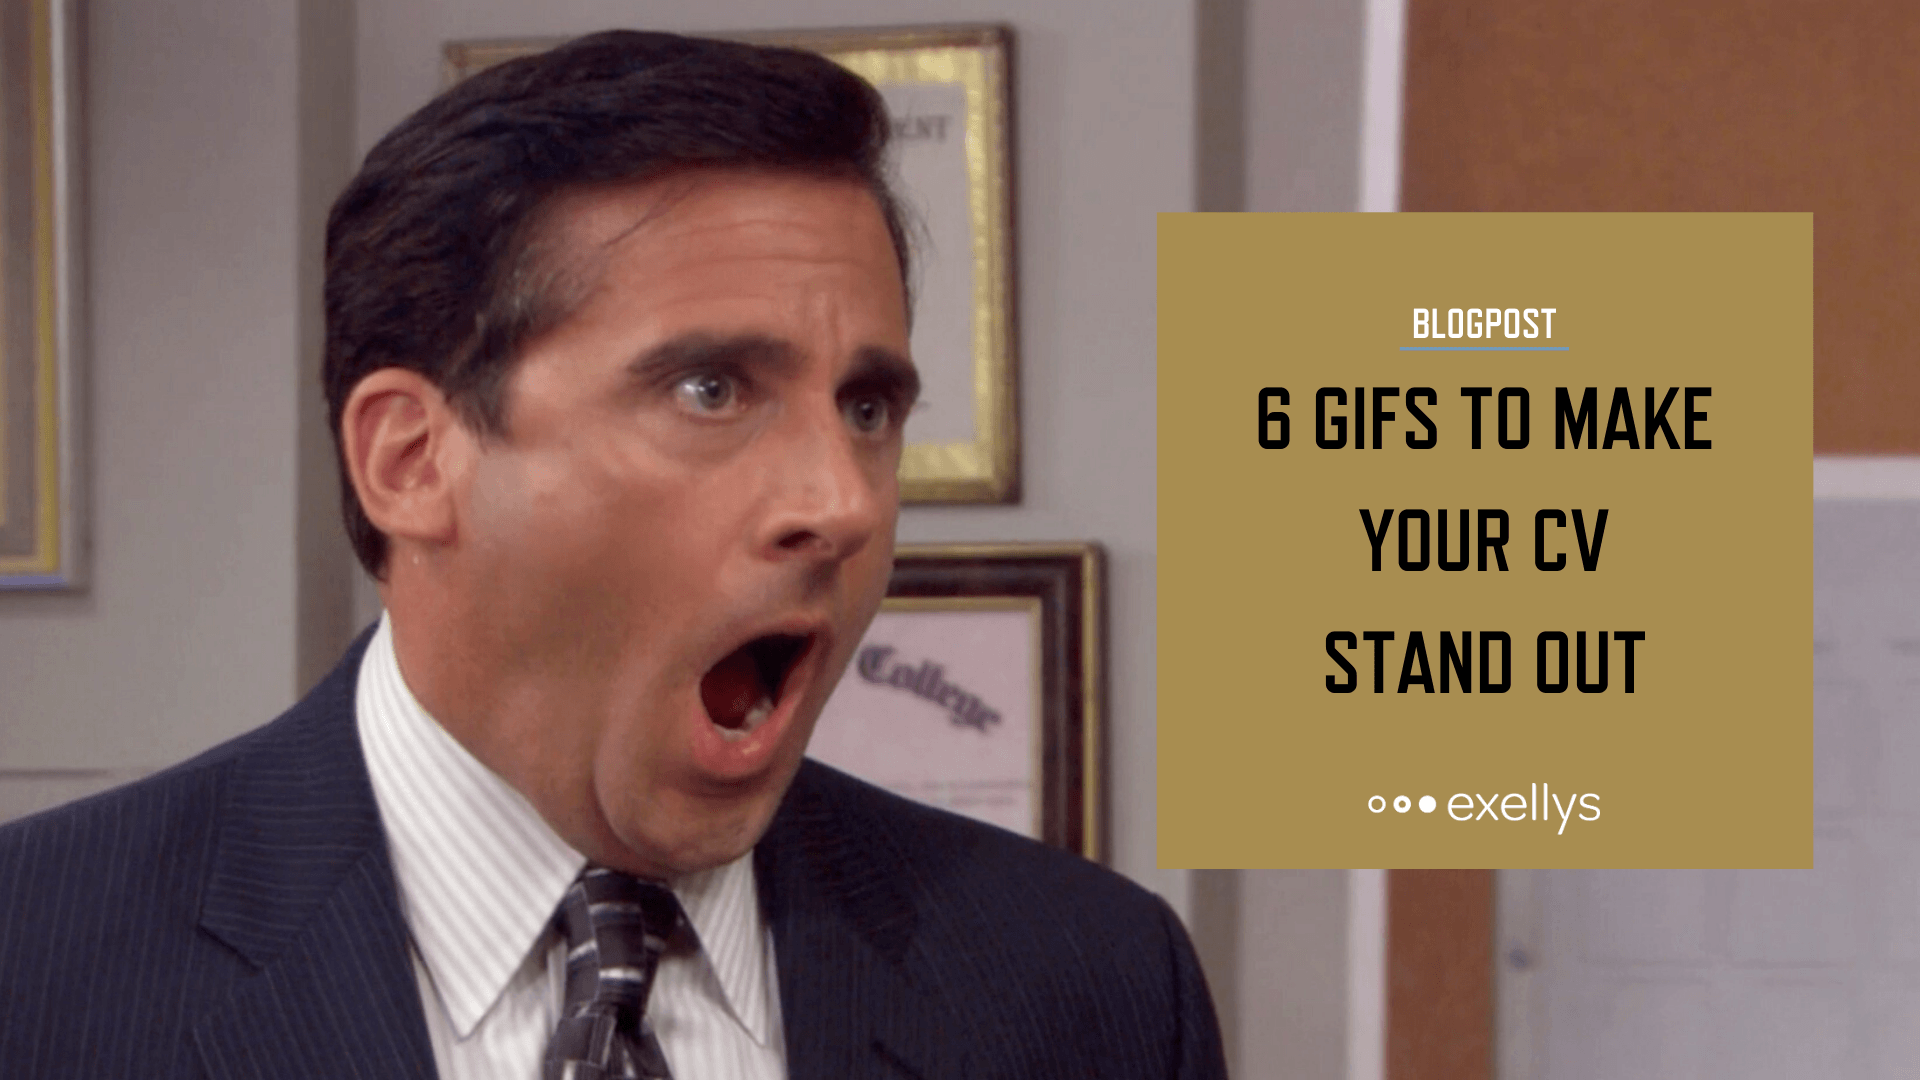 6 GIFs to make your CV stand out - LinkedIn share image